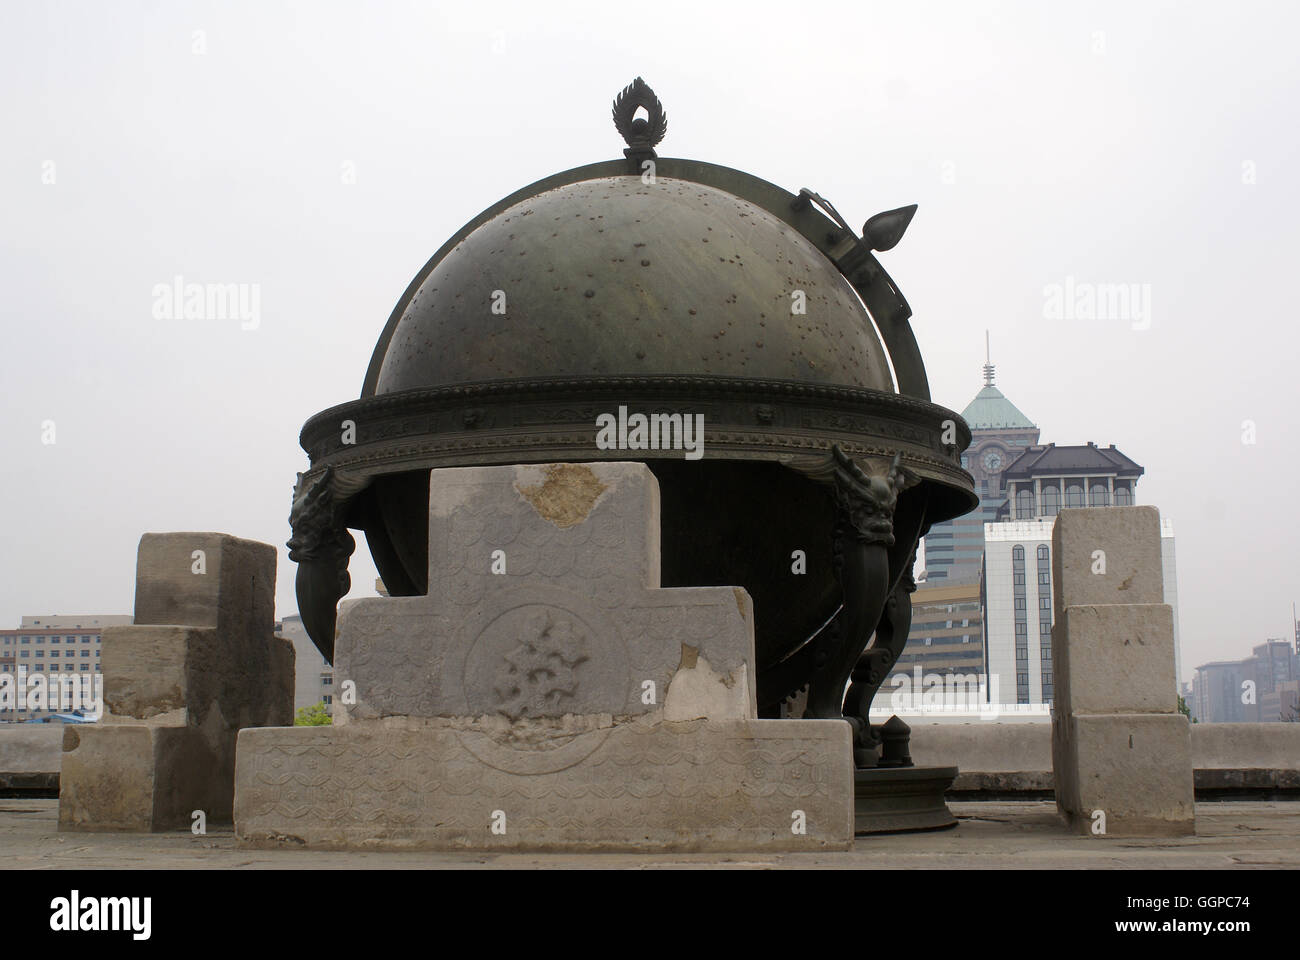 Beijing Ancient Observatory. The celestial globe determines rising and the setting time and azimuth of celestial bodies. Stock Photo